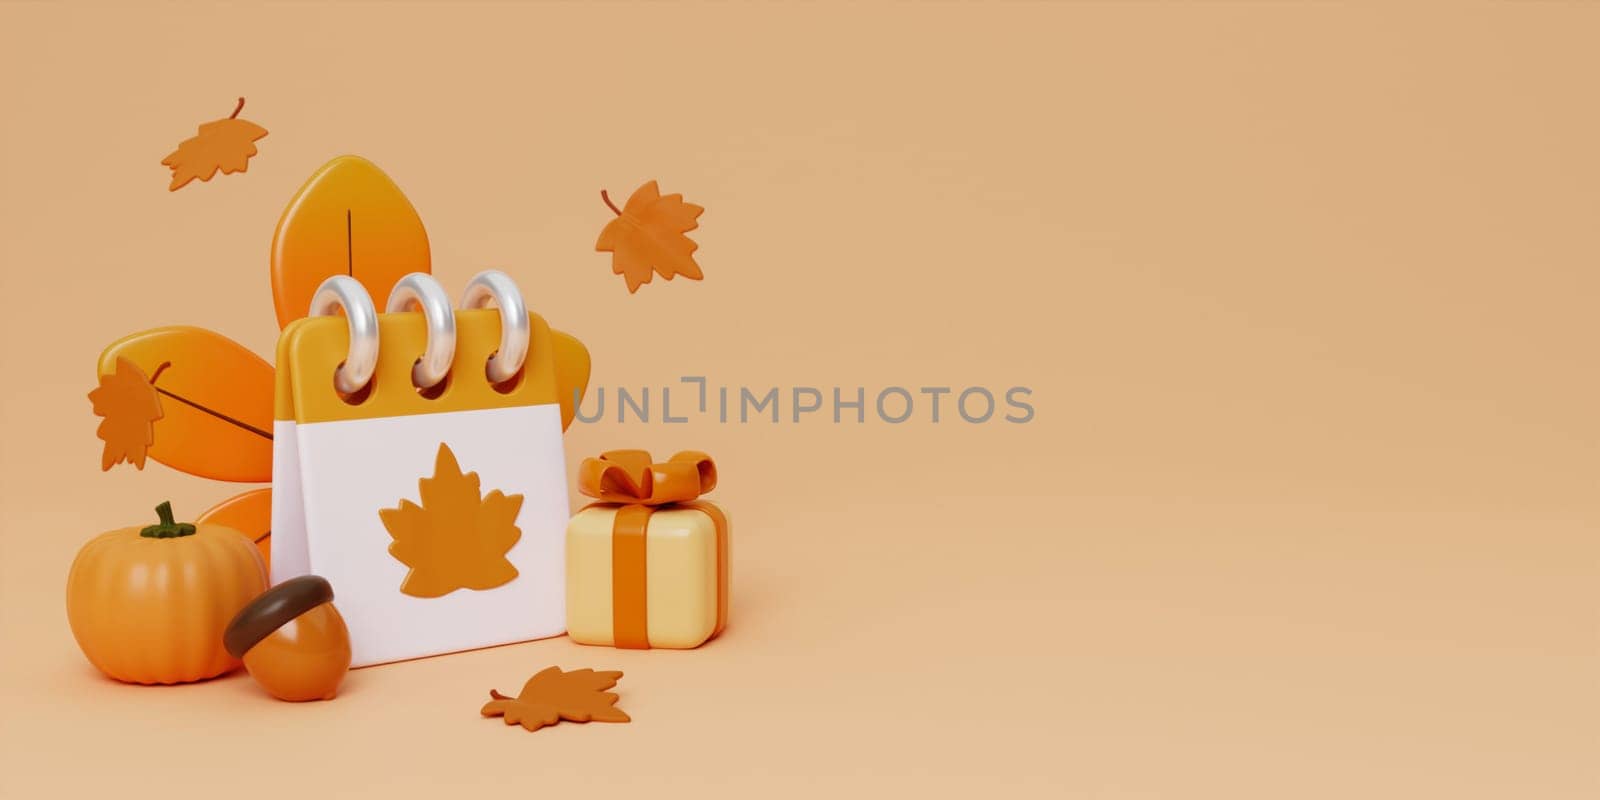 Hello Autumn with autumn calendar, leaves, pumpkins, walnut and gift box background. 3d Fall leaves for the design of Fall banners, posters, advertisements, cards, sales. 3d render illustration. by meepiangraphic